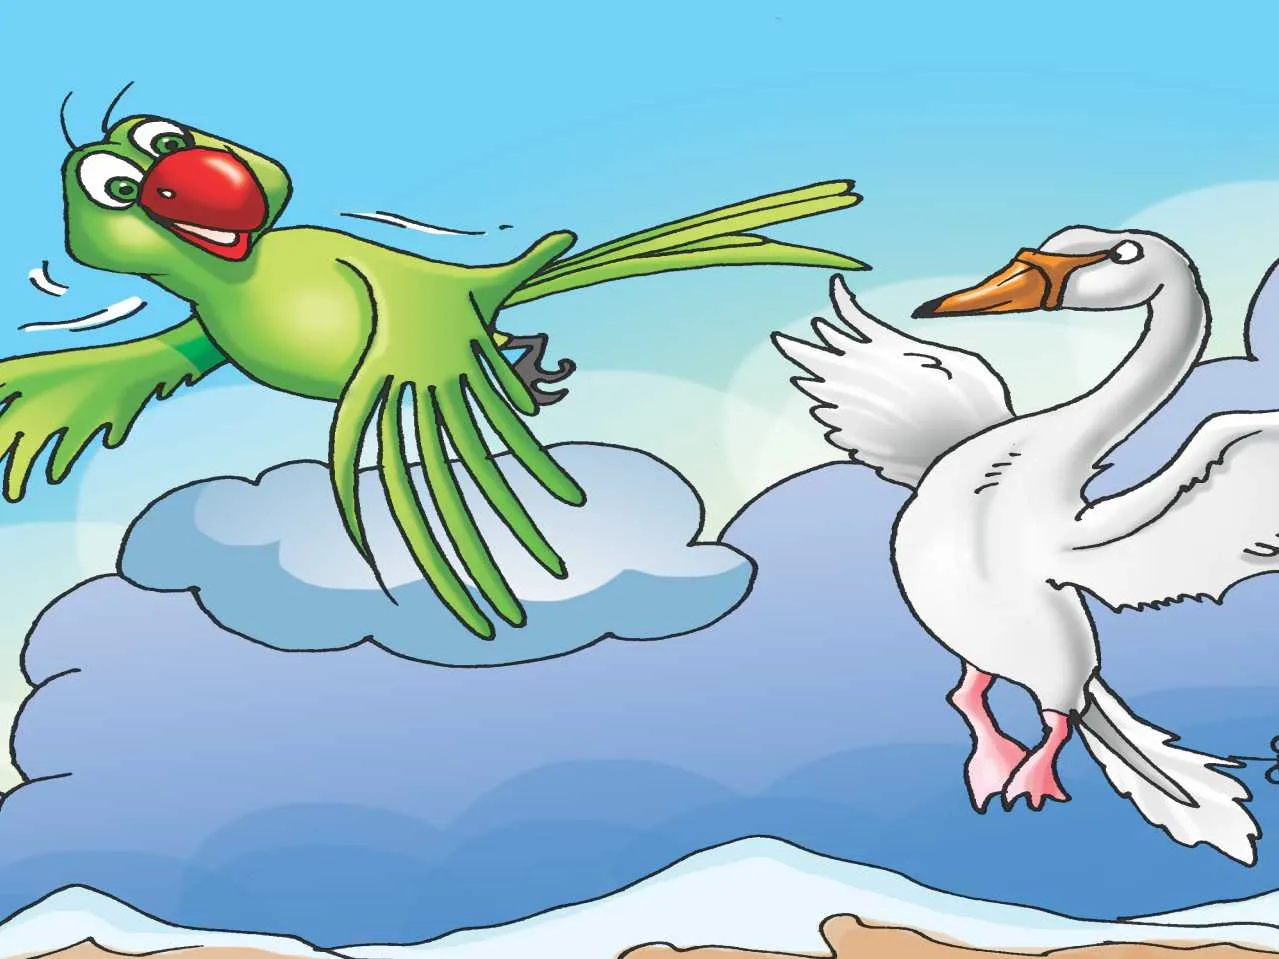 Parrot and Swan cartoon image